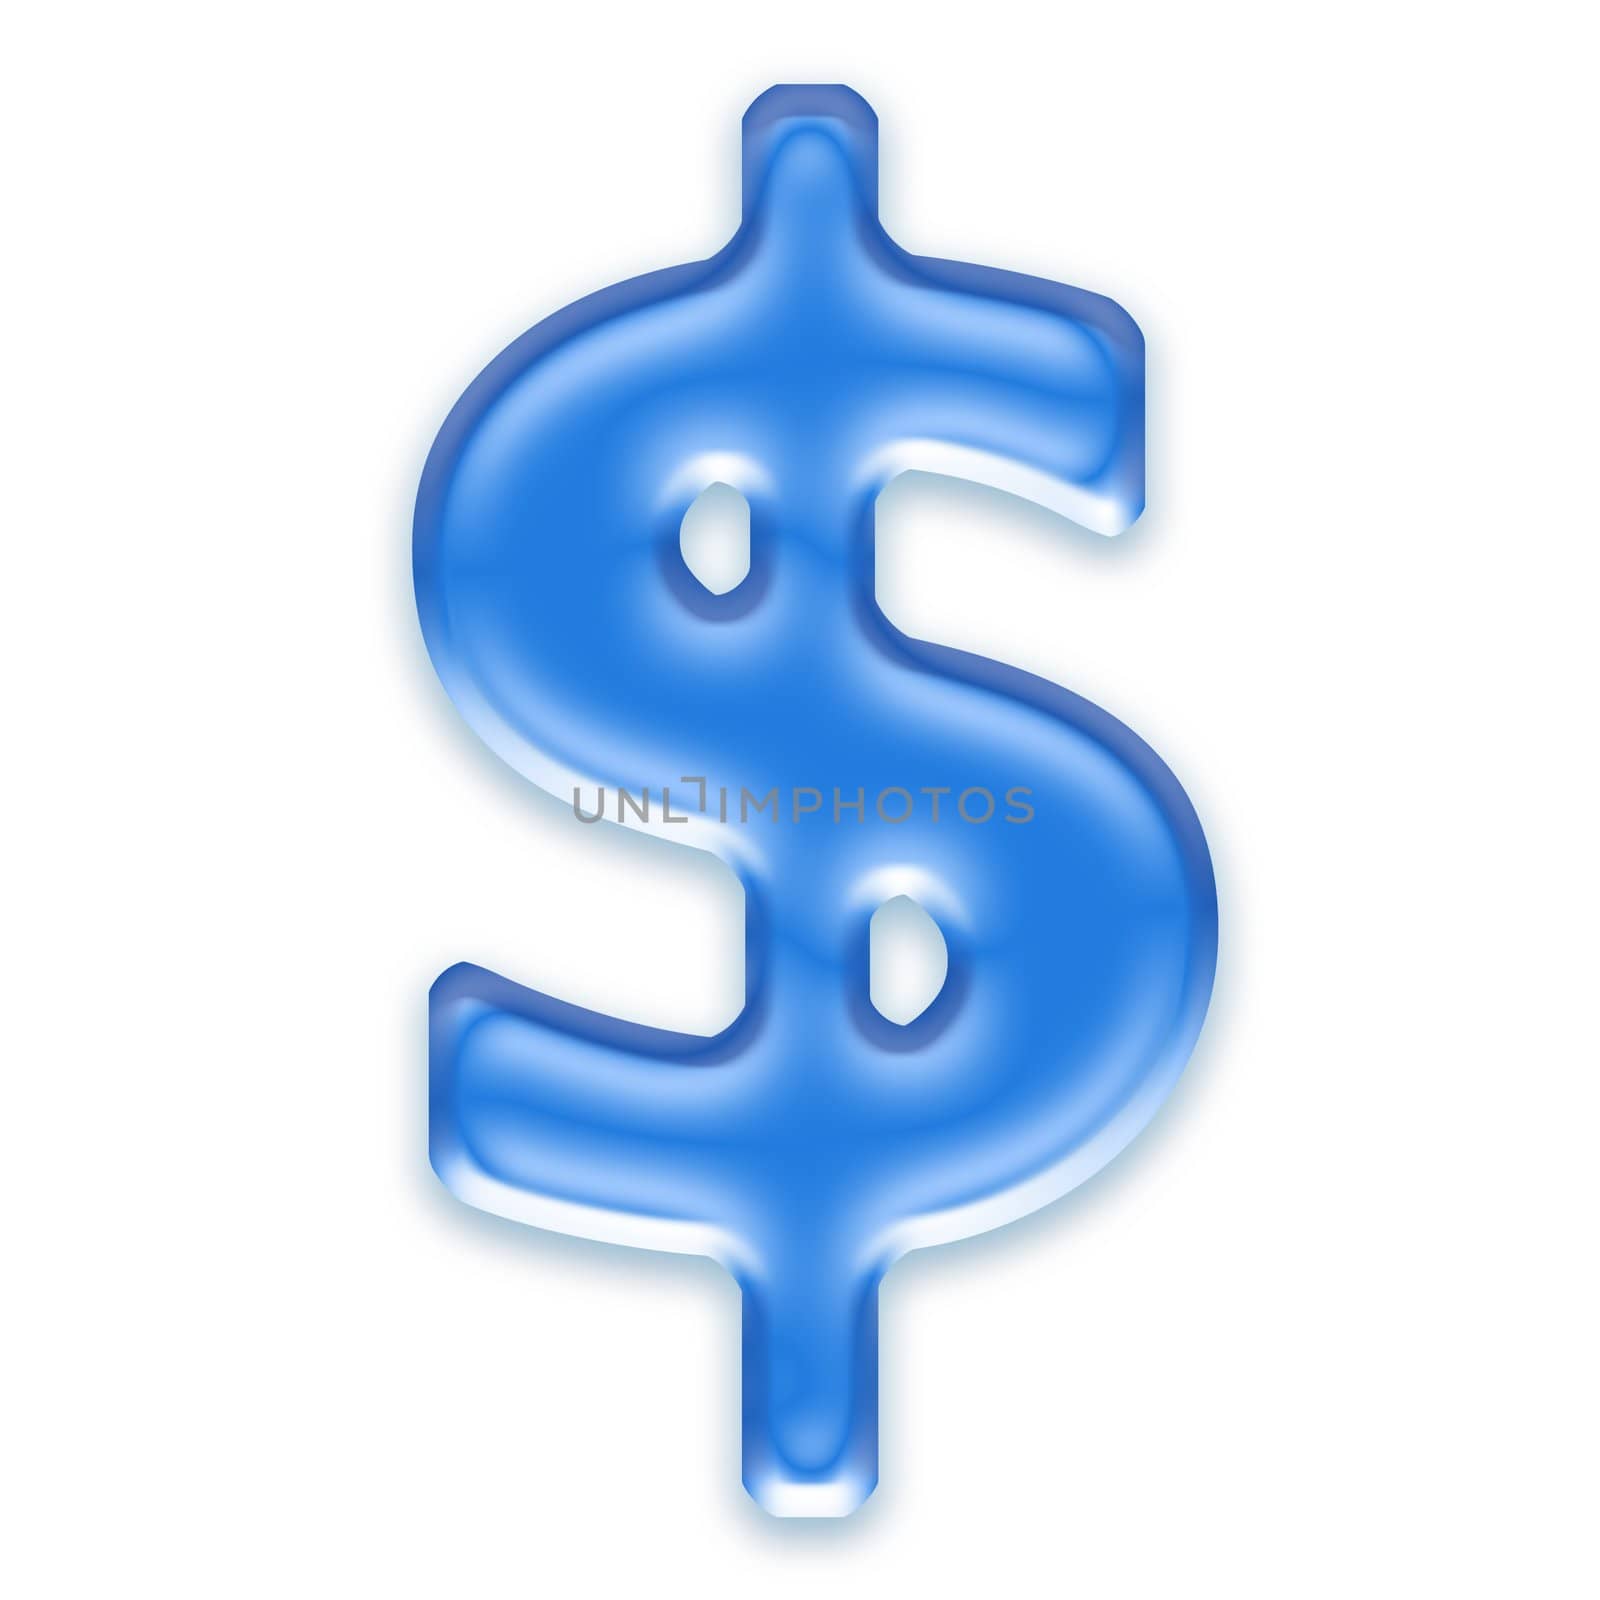 Aqua currency sign isolated on a white background - Dollar by chrisroll